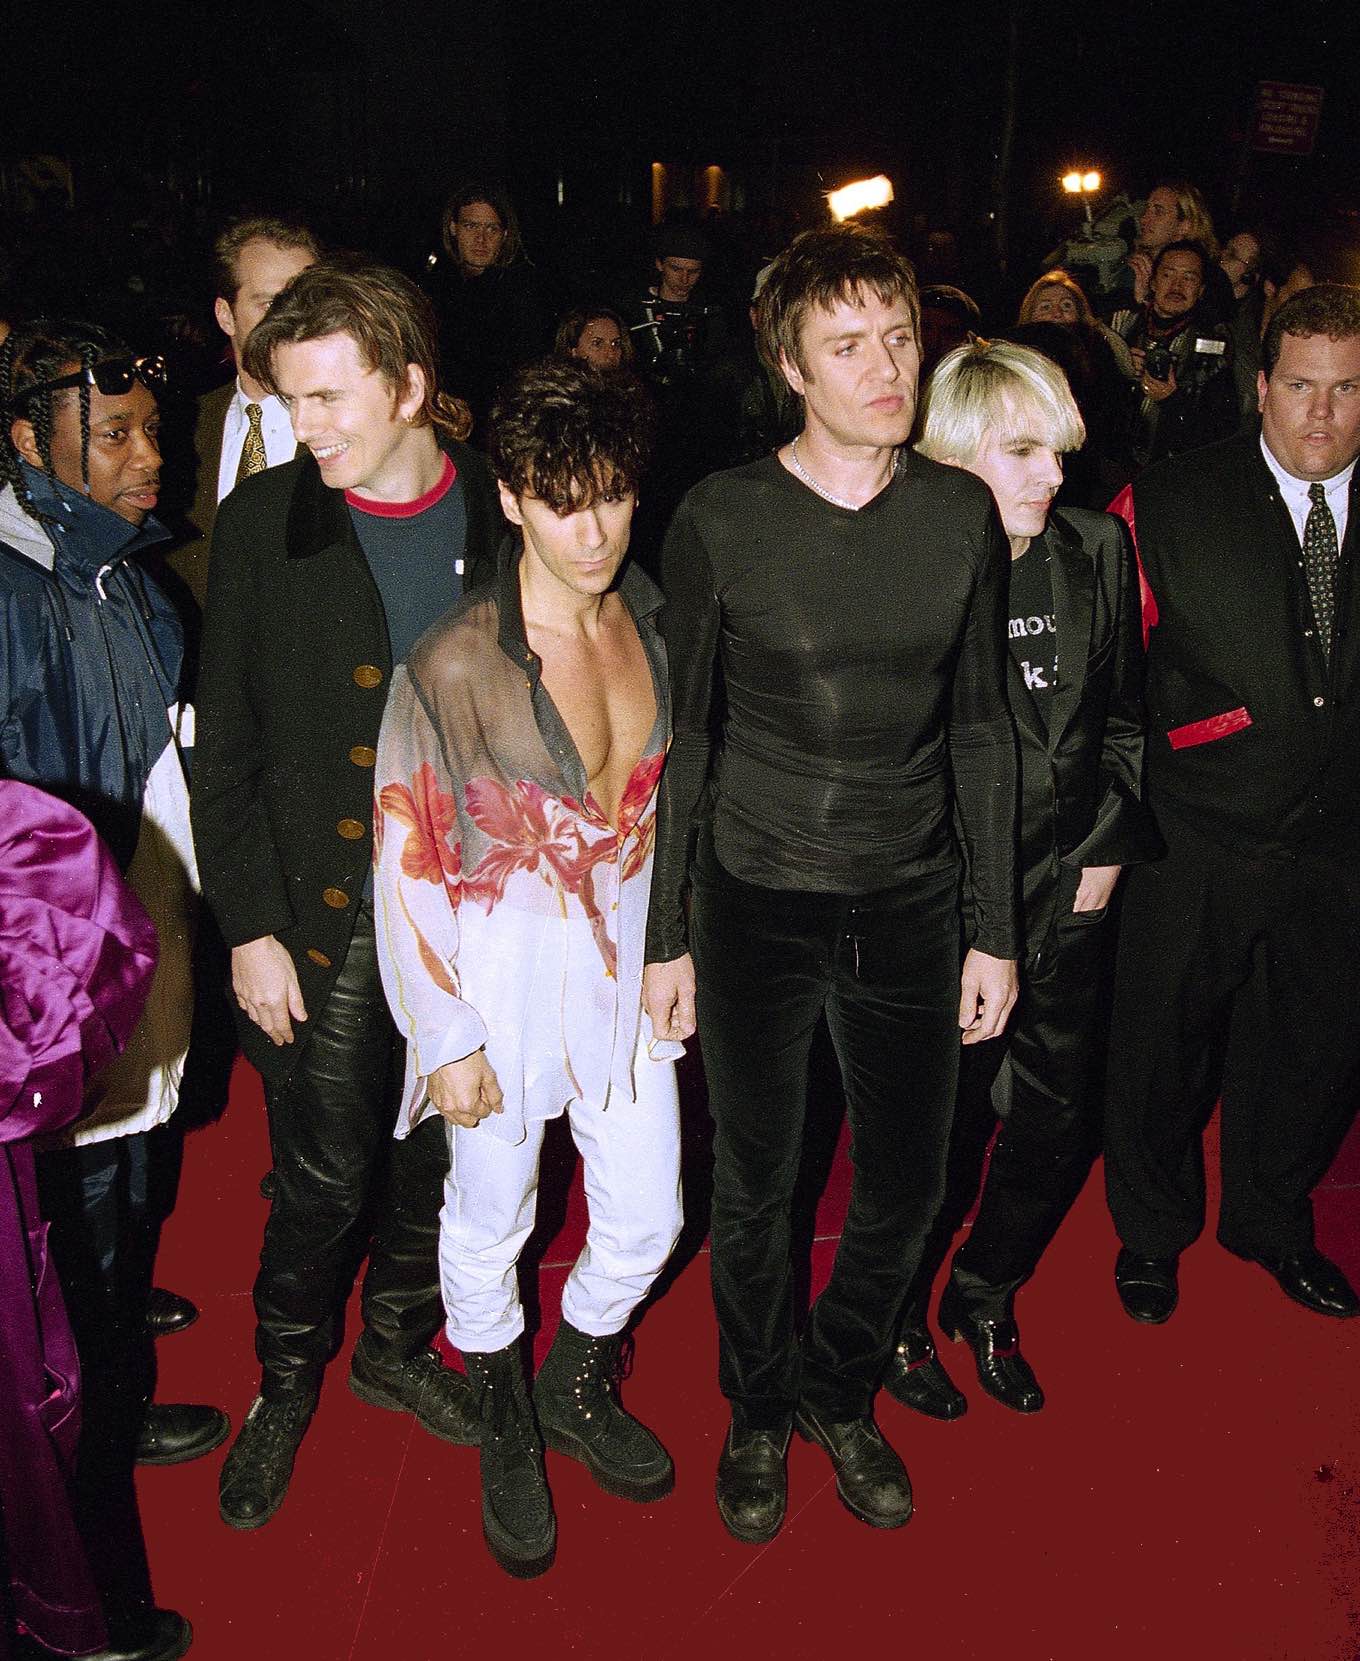 Members of the band Duran Duran arrive for their opening night performance at New York's Fashion Cafe, April 7, 1995. From left: John Taylor, Roger Taylor, Simon Le Bon, and Nick Rhodes. (AP Photo/Adam Nadel)